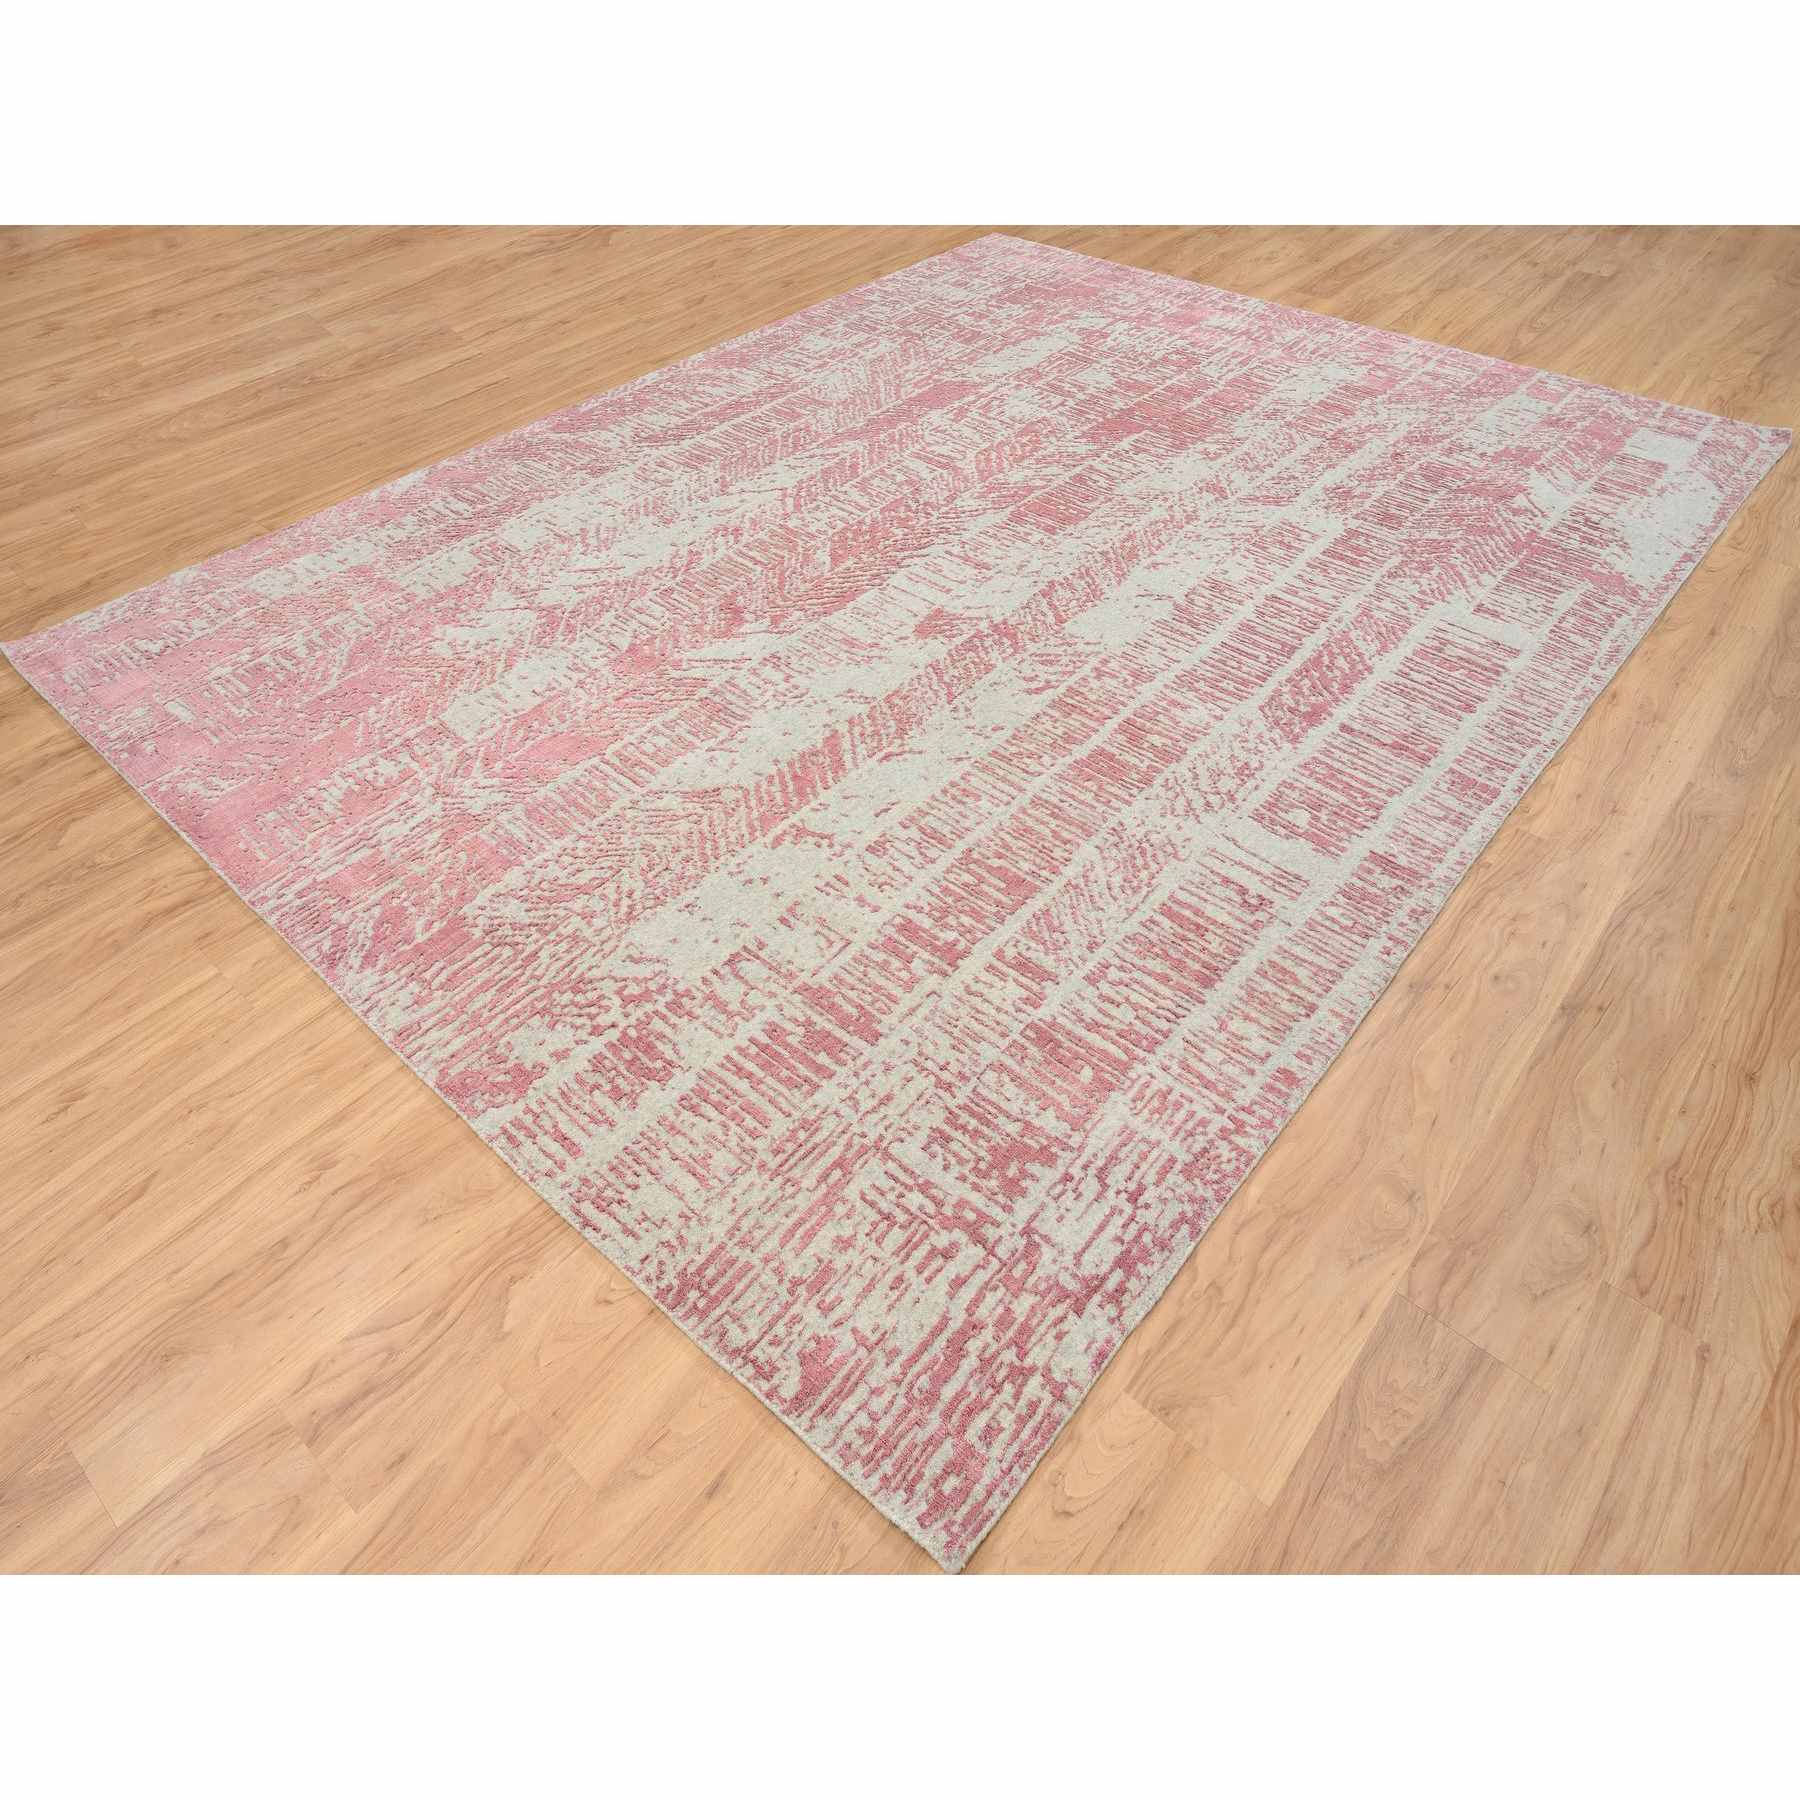 Transitional-Hand-Loomed-Rug-324035